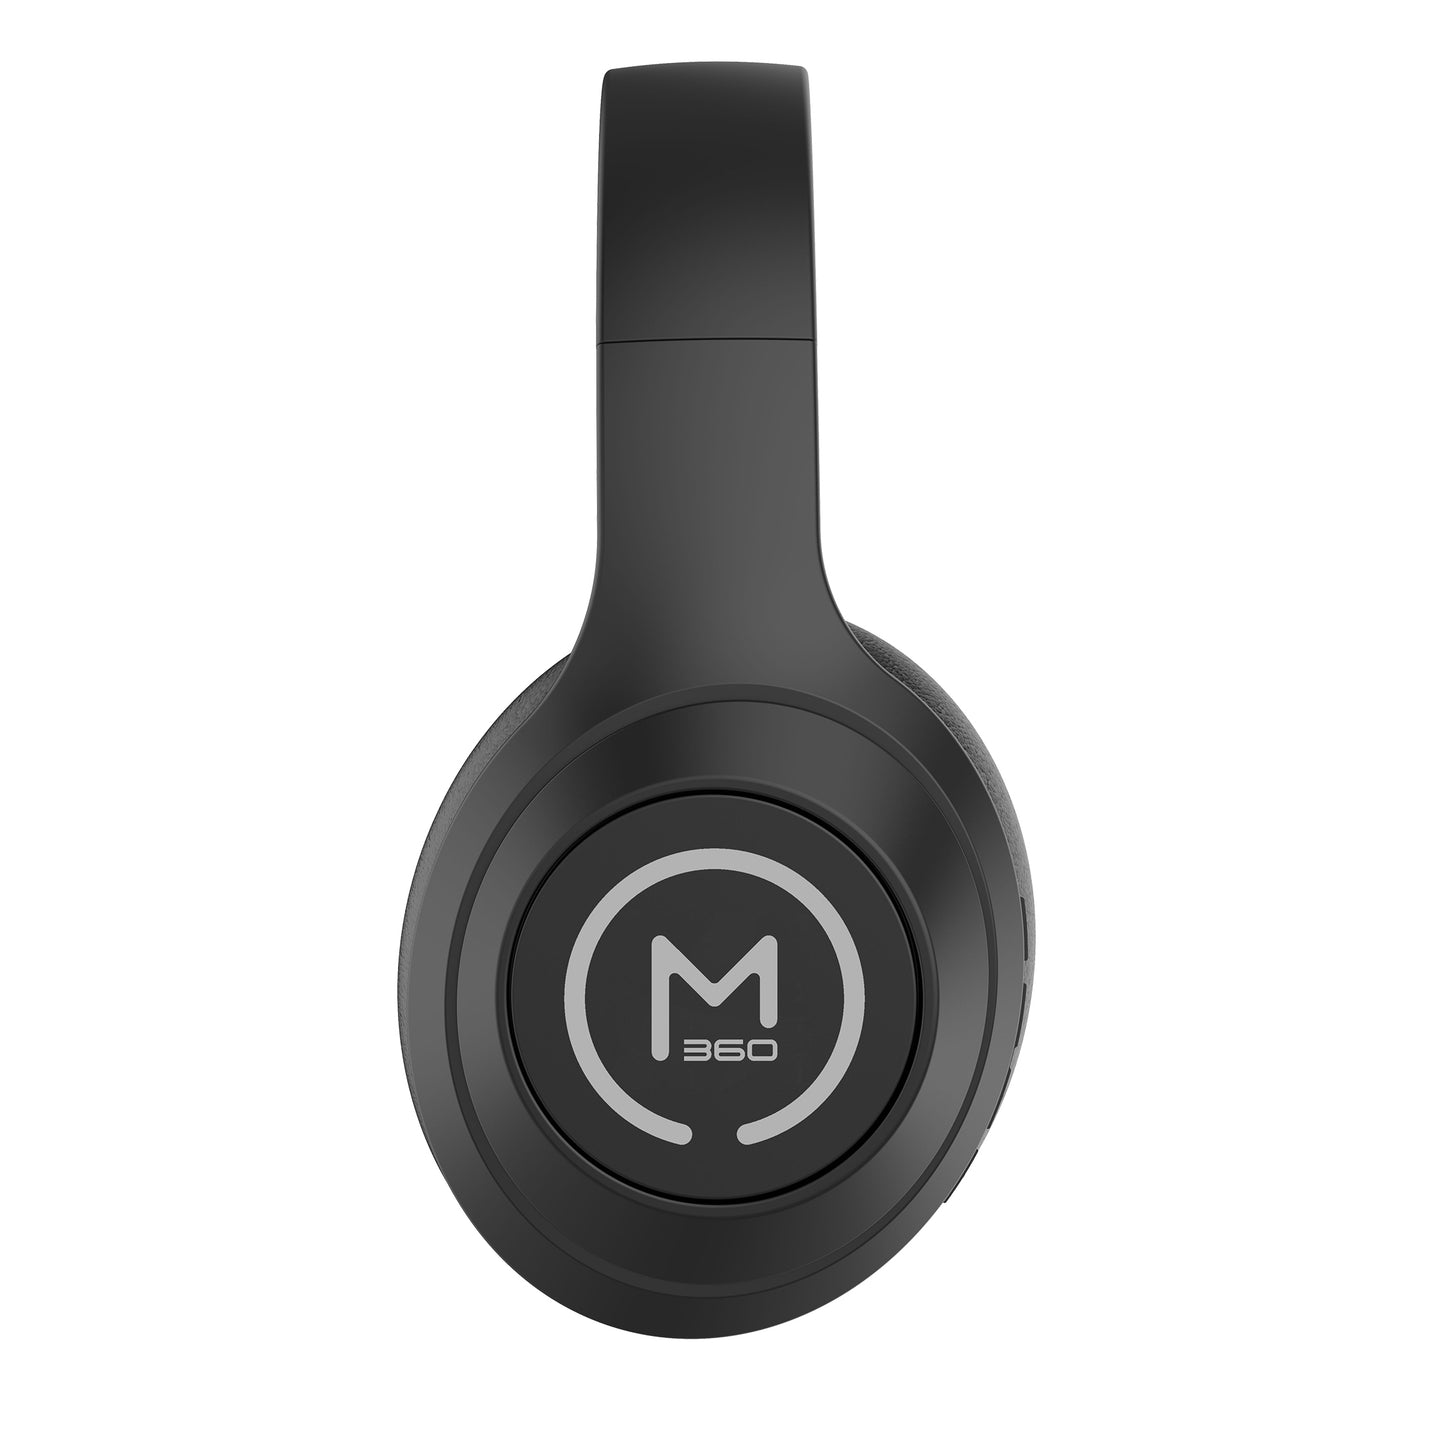 Morpheus 360 Comfort Plus Wireless Over-Ear Headphones - Bluetooth Headset with Microphone - 10H Playtime - HP6500B